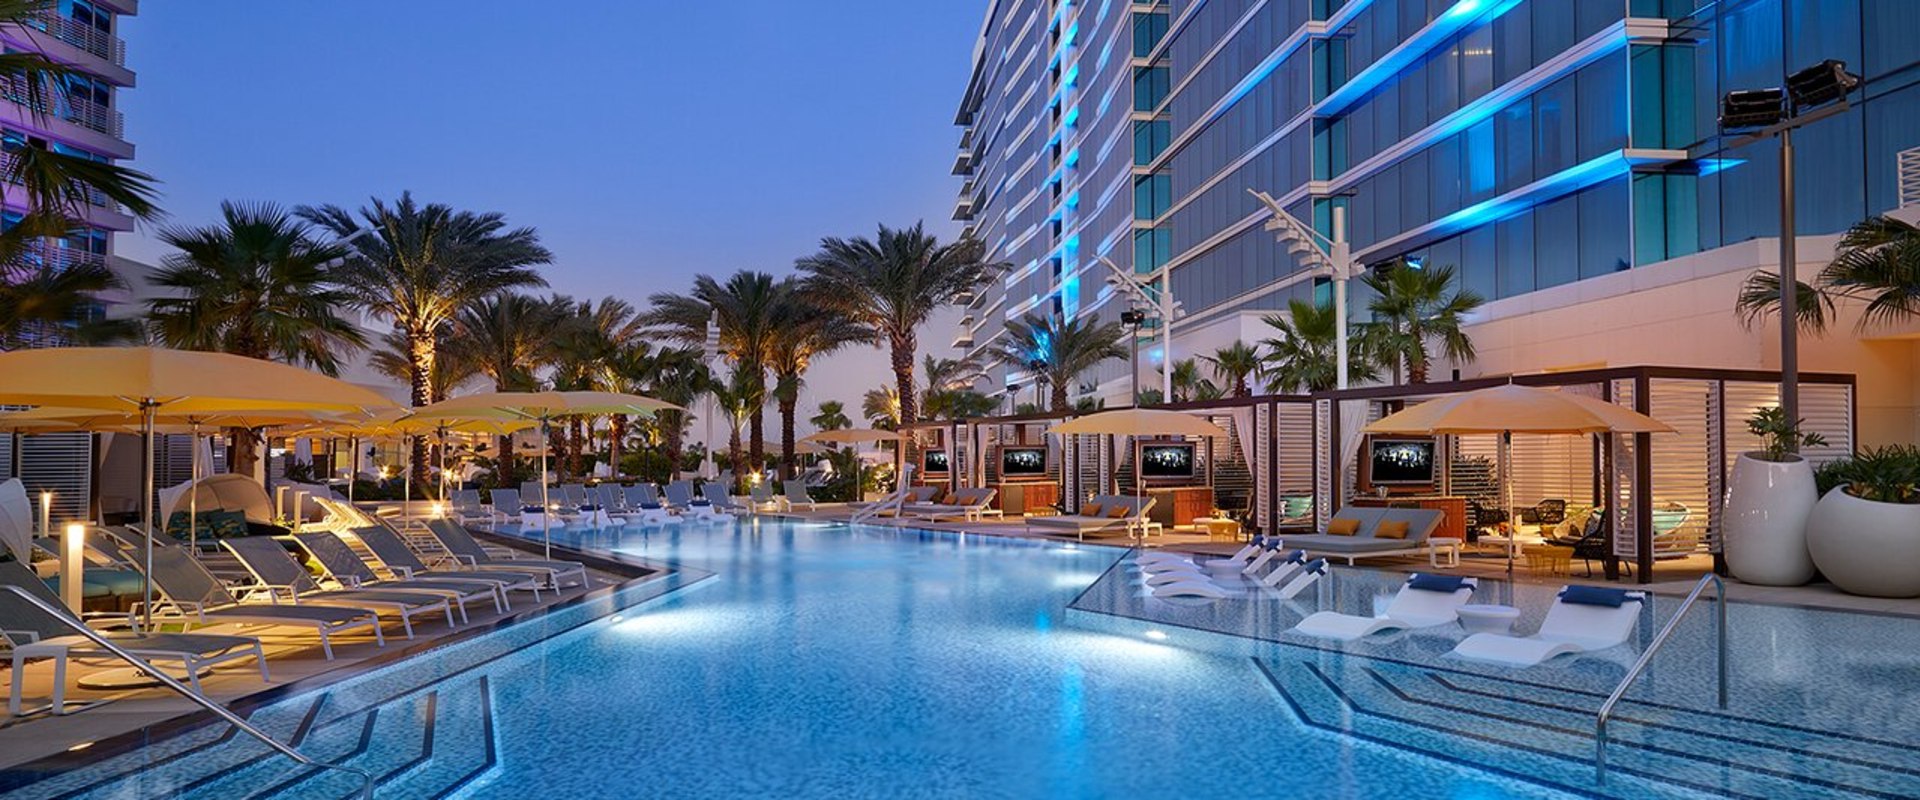 The Best 1-Star Hotels and Resorts in Tampa, Florida